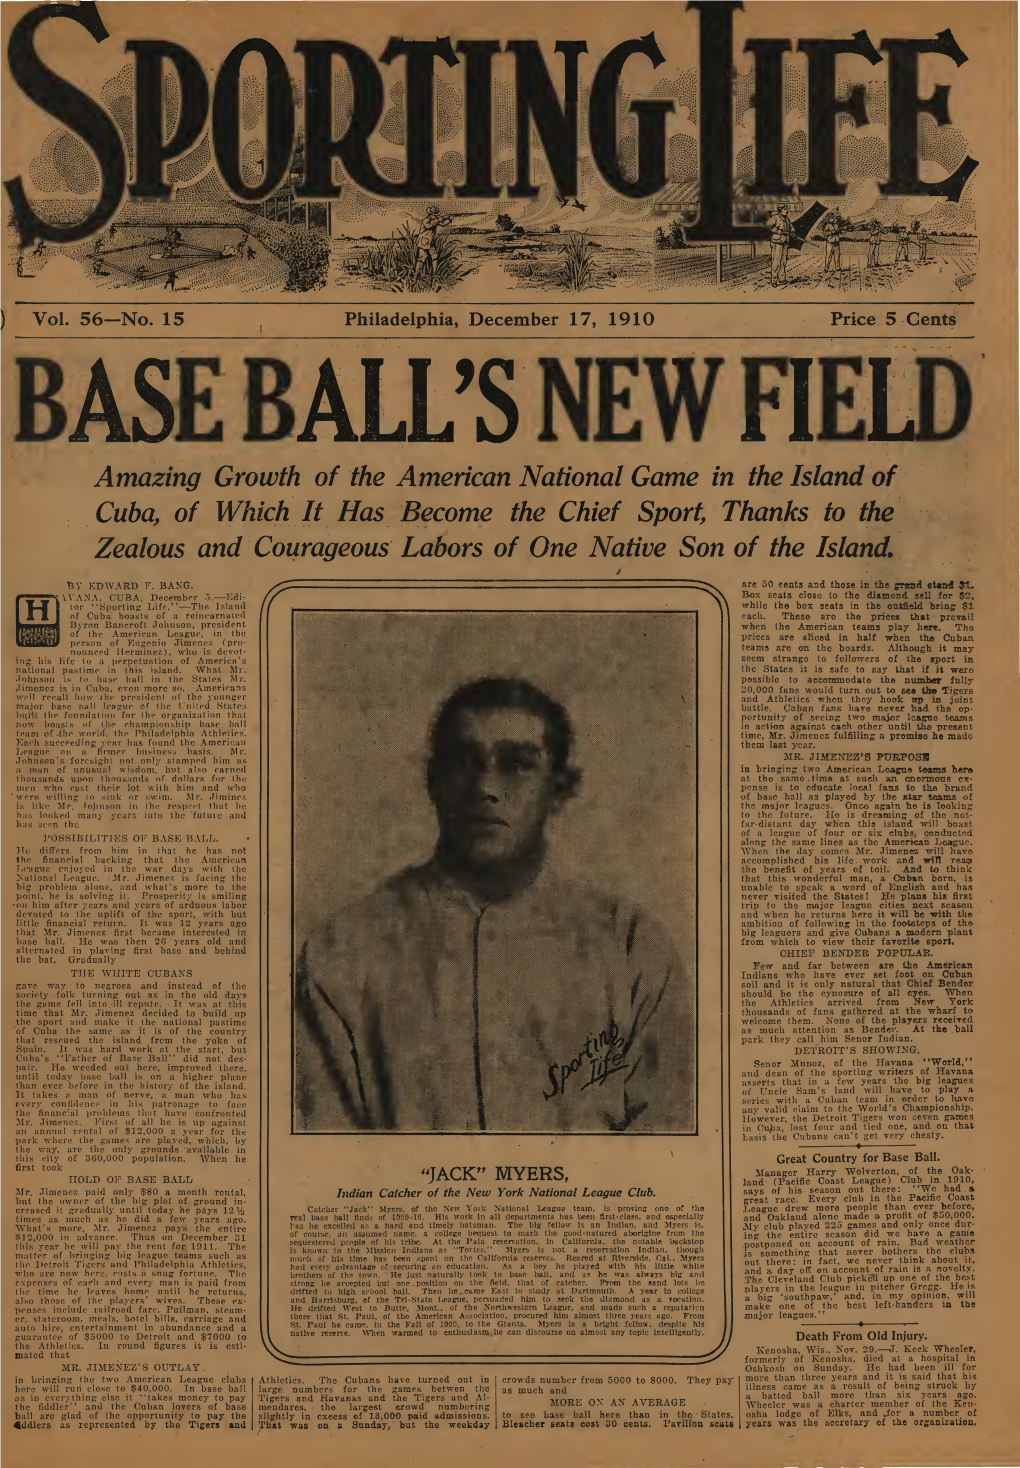 Indoor Base Ball Guide for 1910